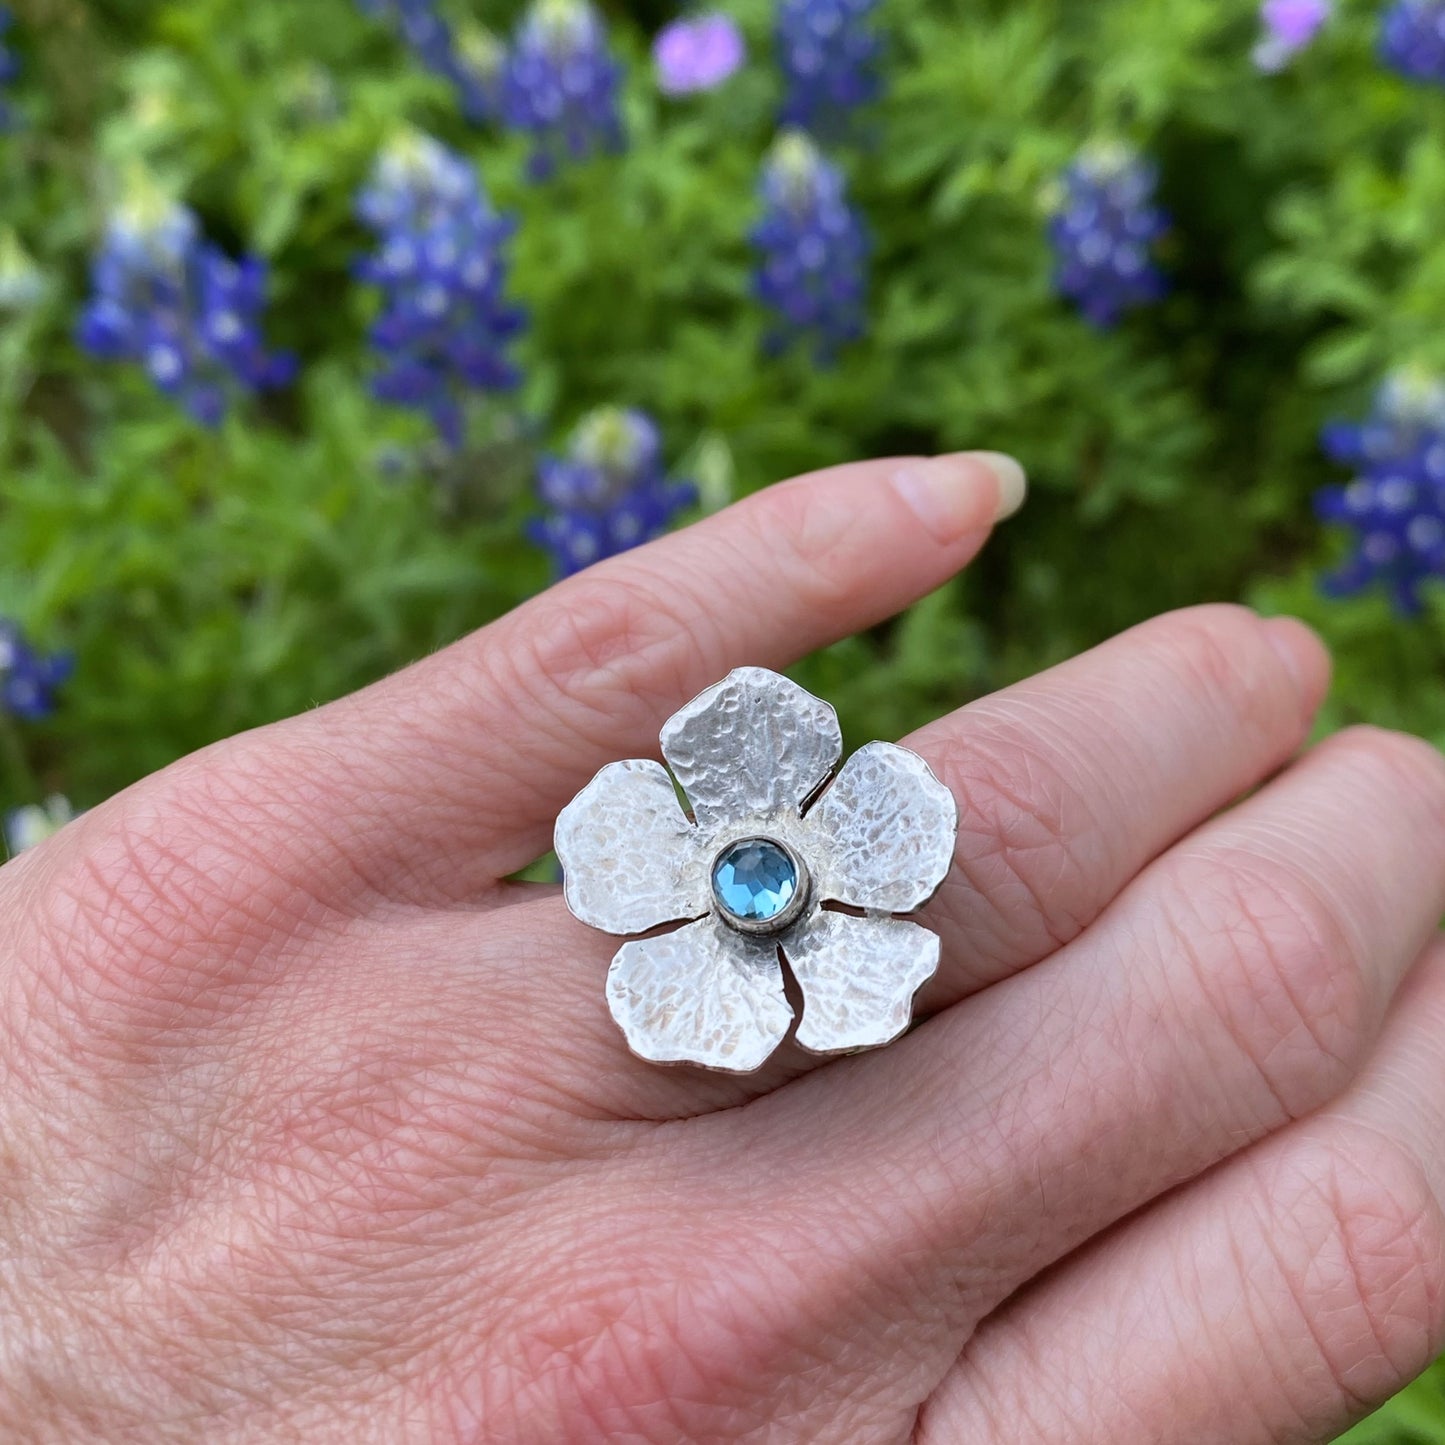 Handmade Blue Topaz Flower Hand-Pierced Sterling Silver Ring - Size 6.5 by Cara Carter Jewelry